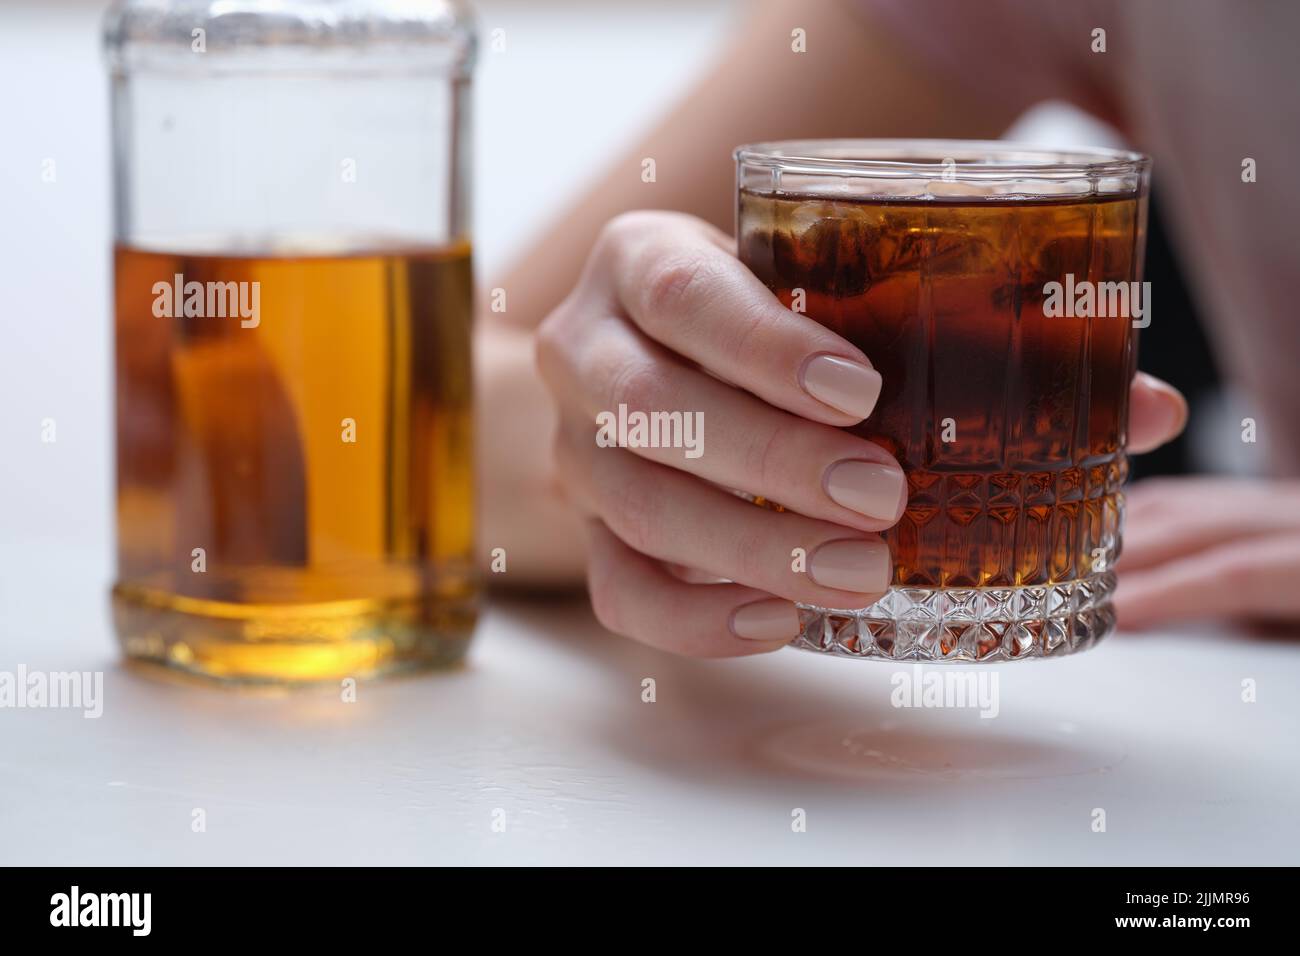 Woman hand holds glass of whiskey or cognac with bottle Stock Photo